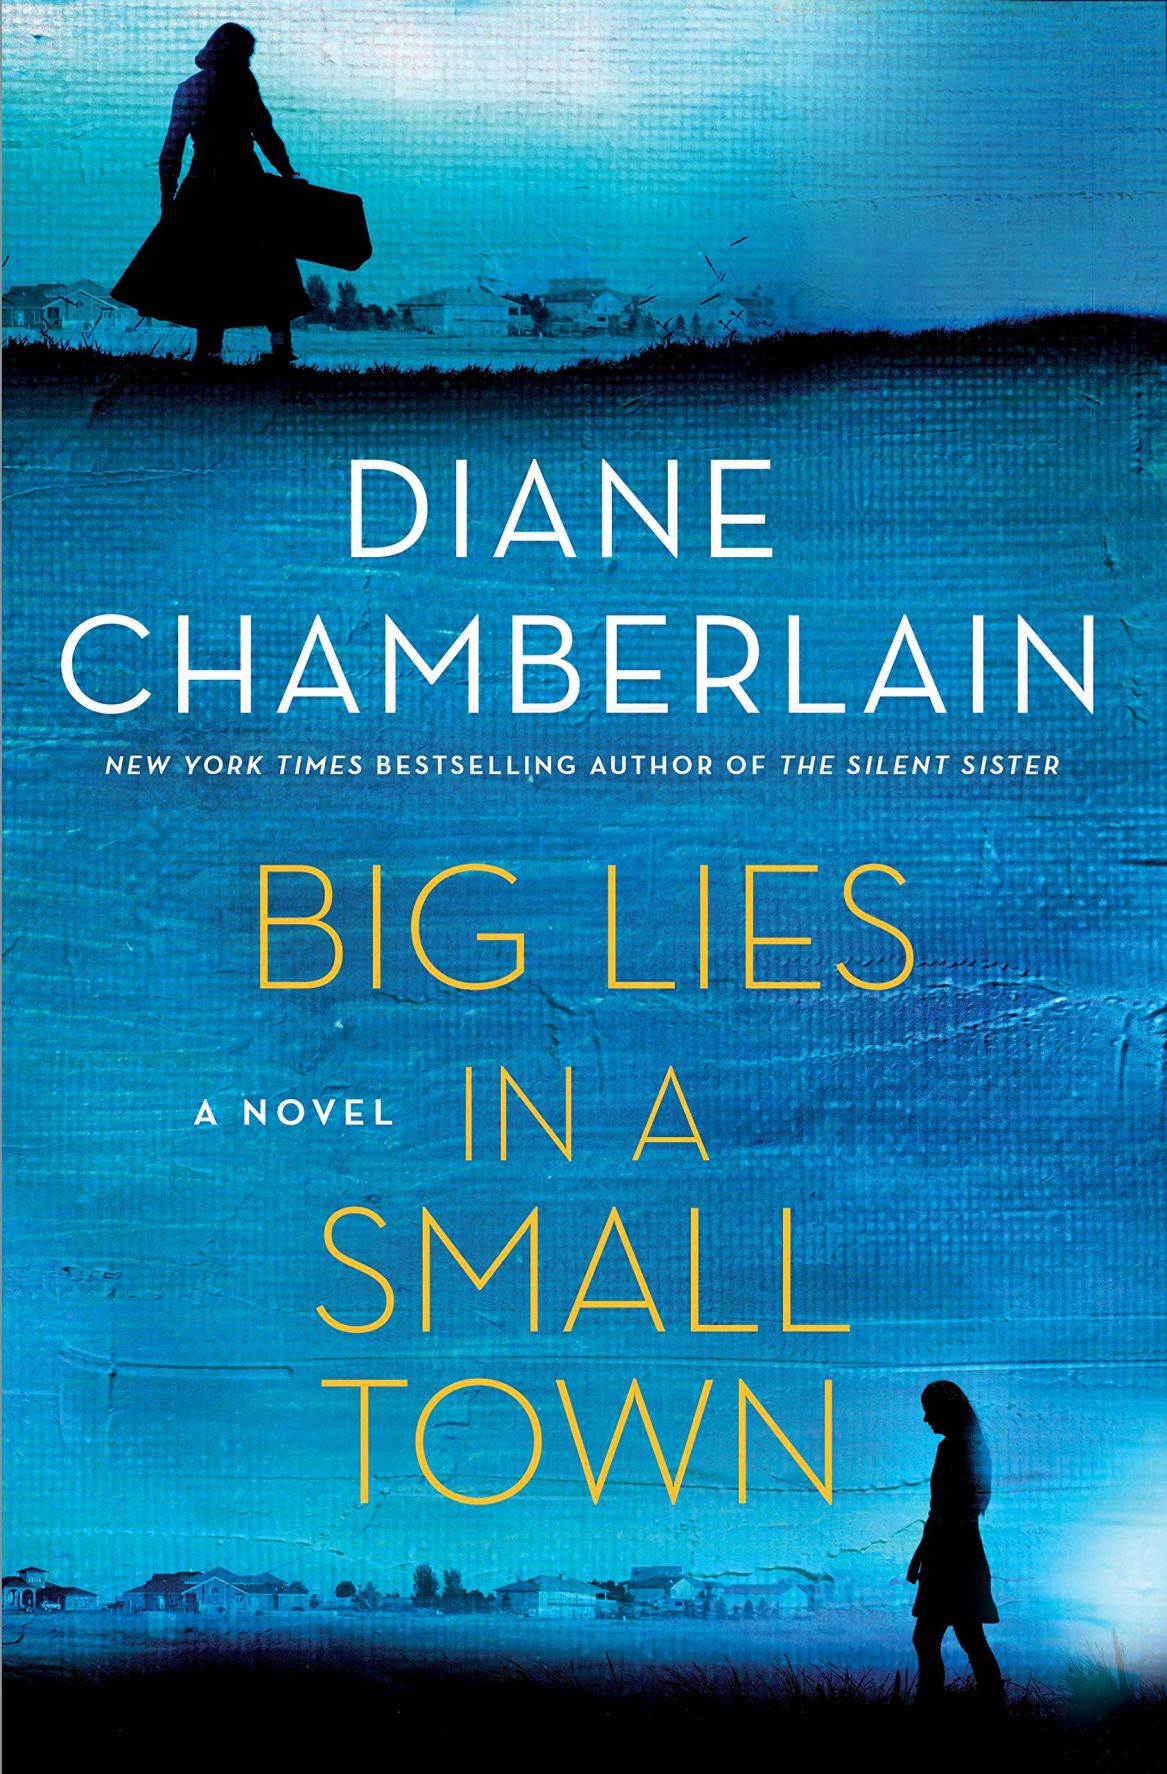 big lies in a small town book review